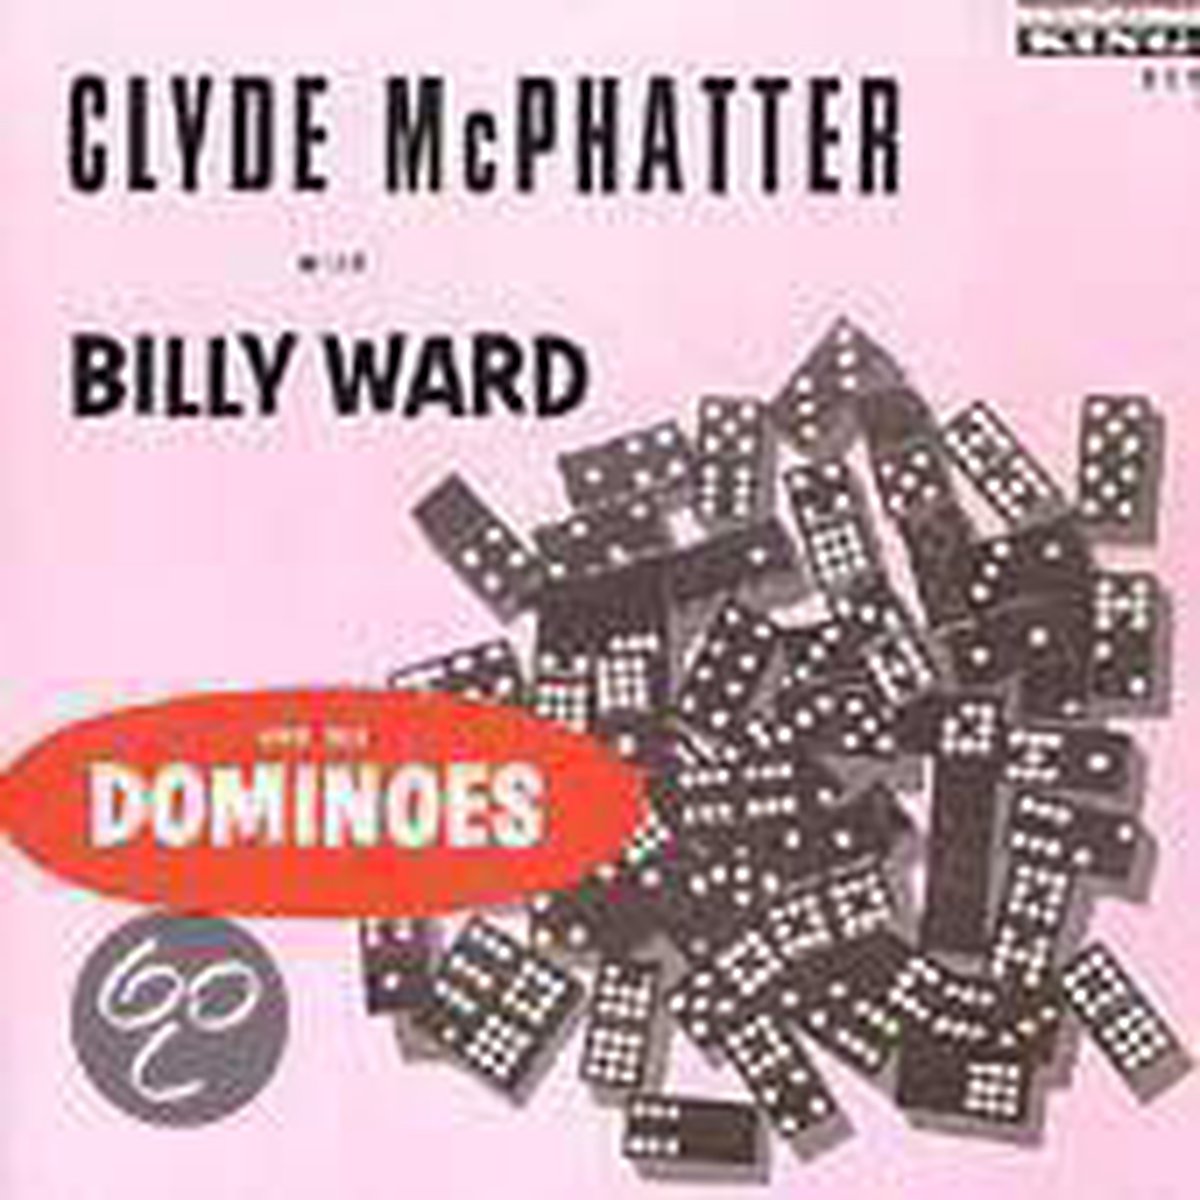 With Billy Ward & Dominoe - Clyde Mcphatter